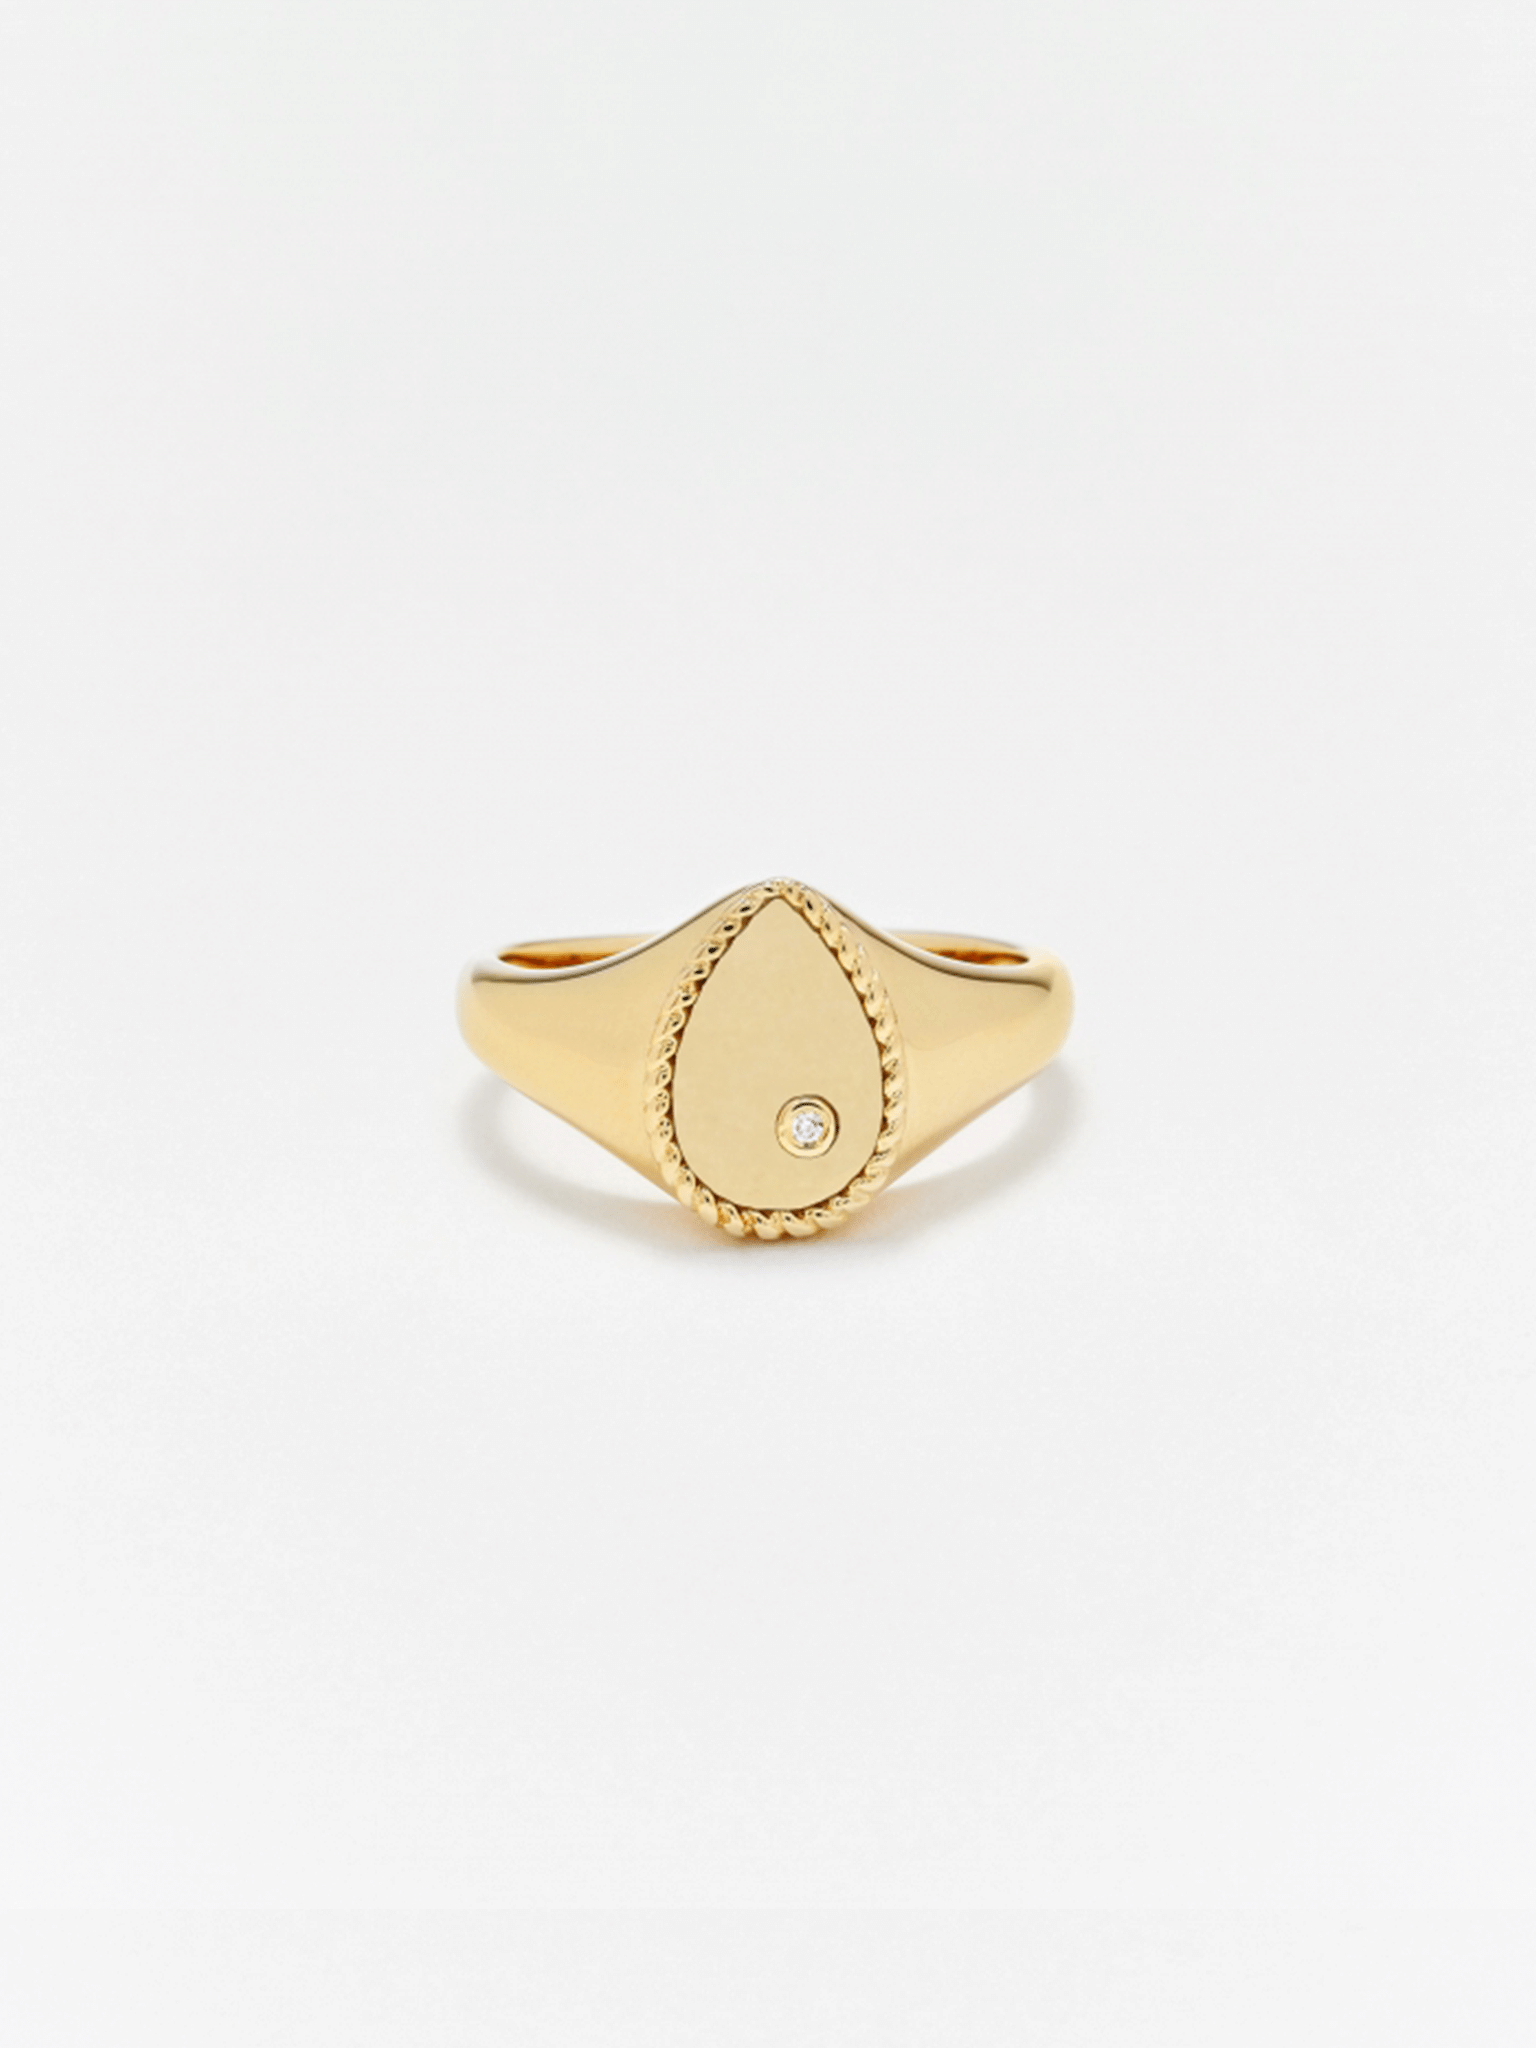 Mini diamond and gold pear signet ring by Yvonne Leon | Finematter